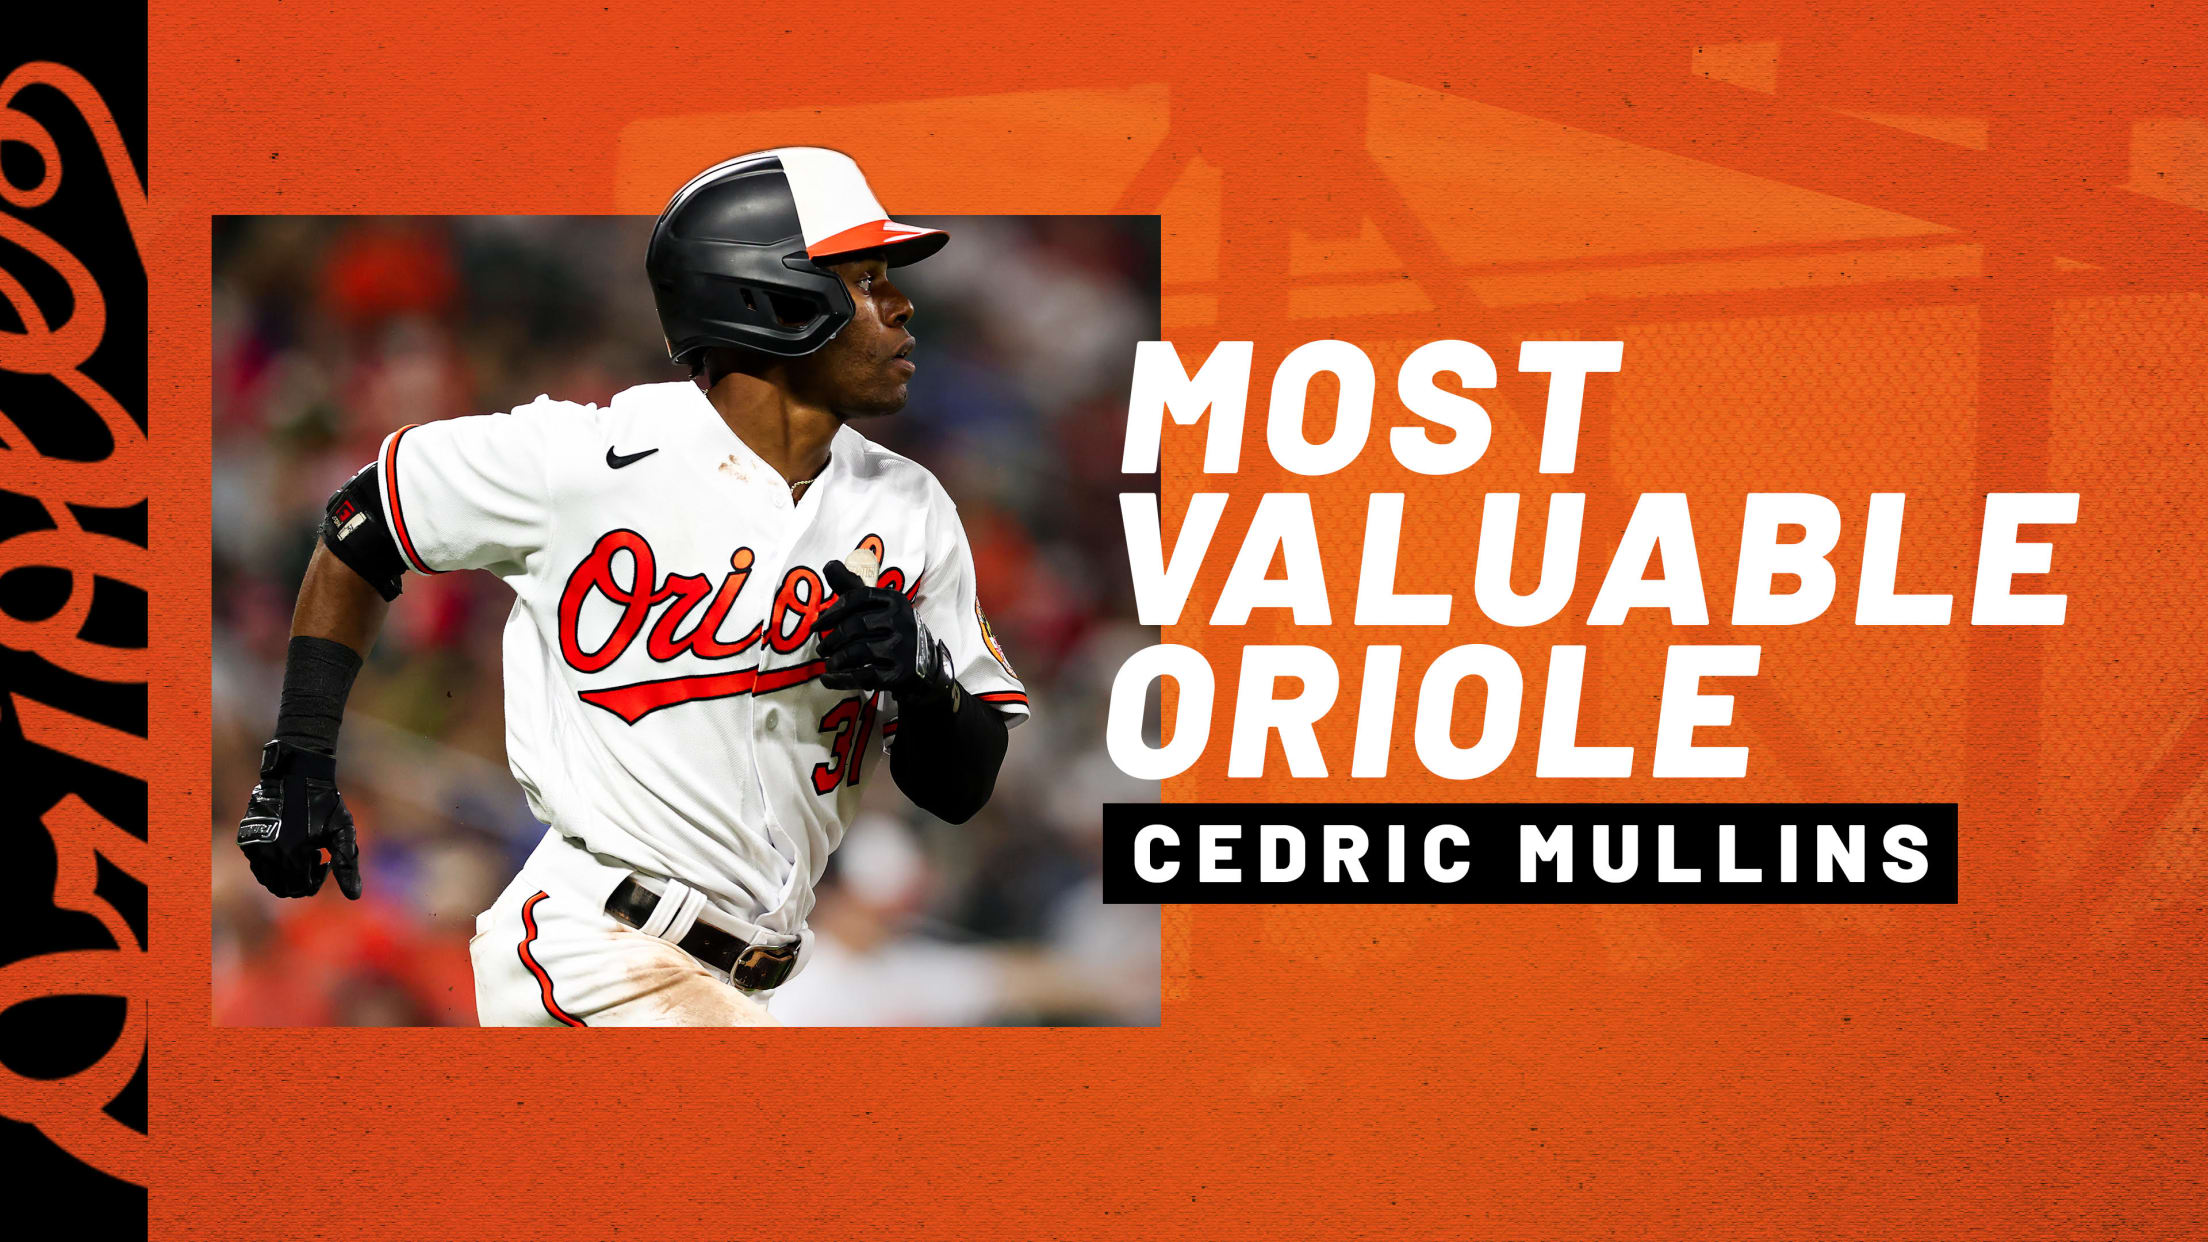 Cedric Mullins Named 2021 Most Valuable Oriole